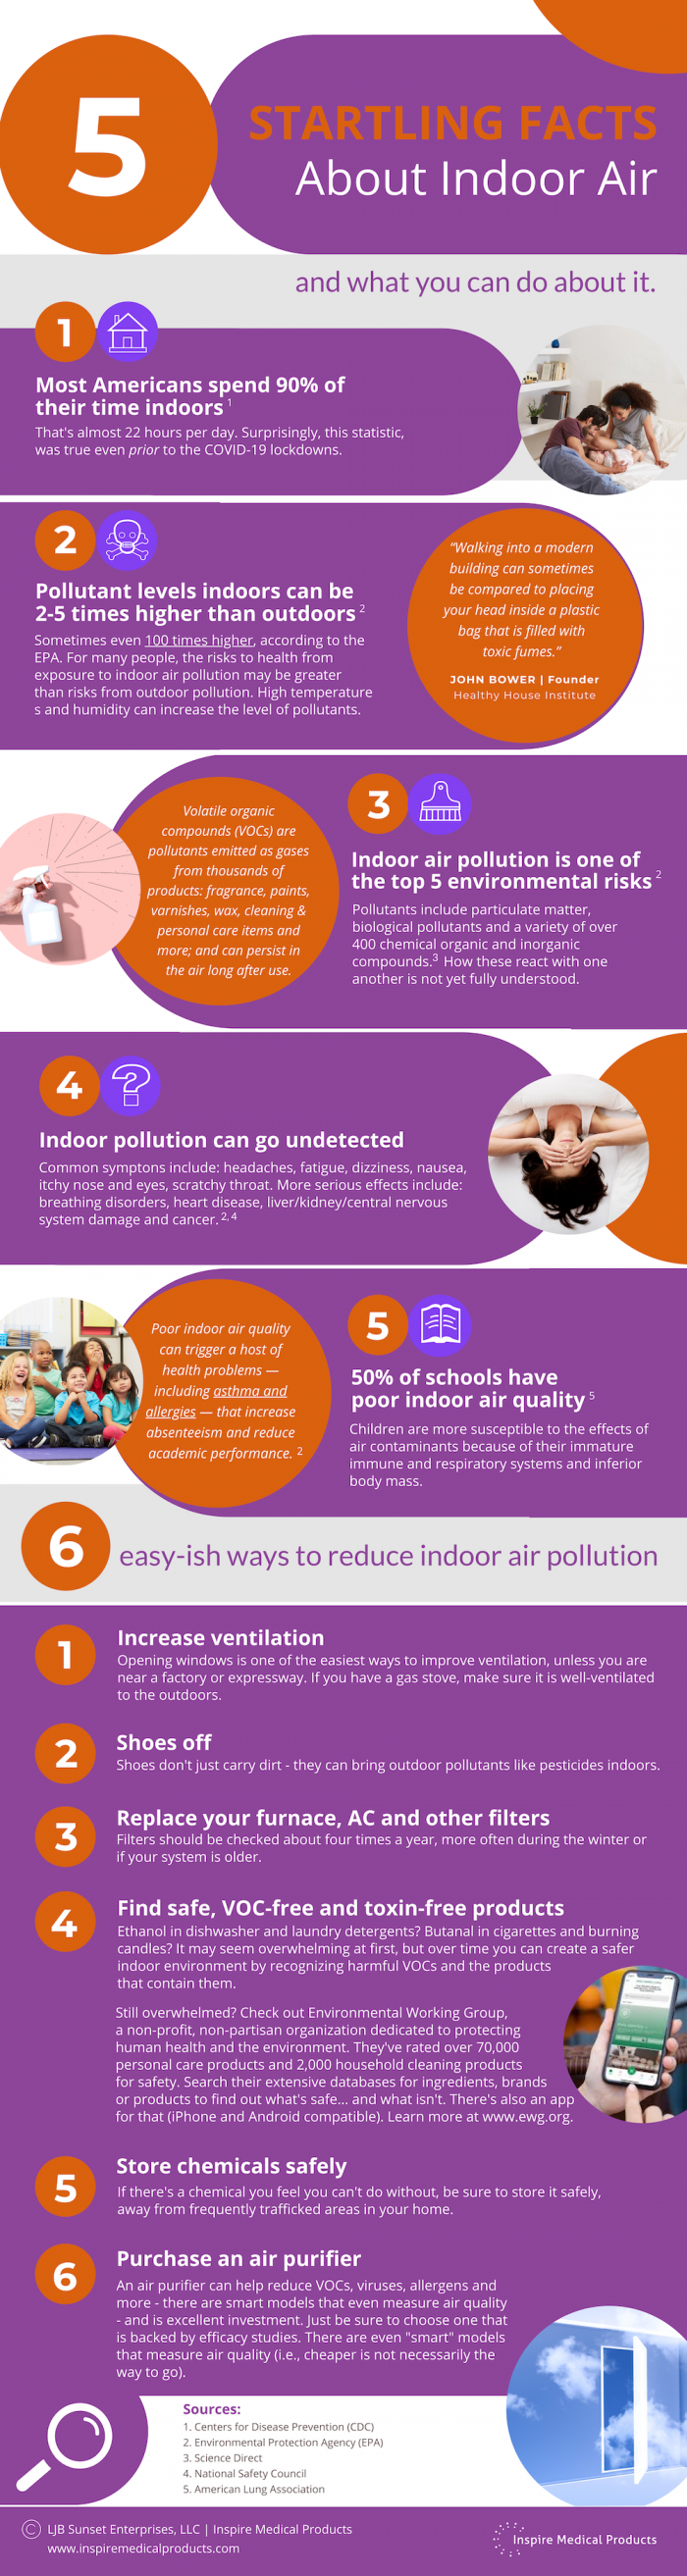 facts about indoor air quality